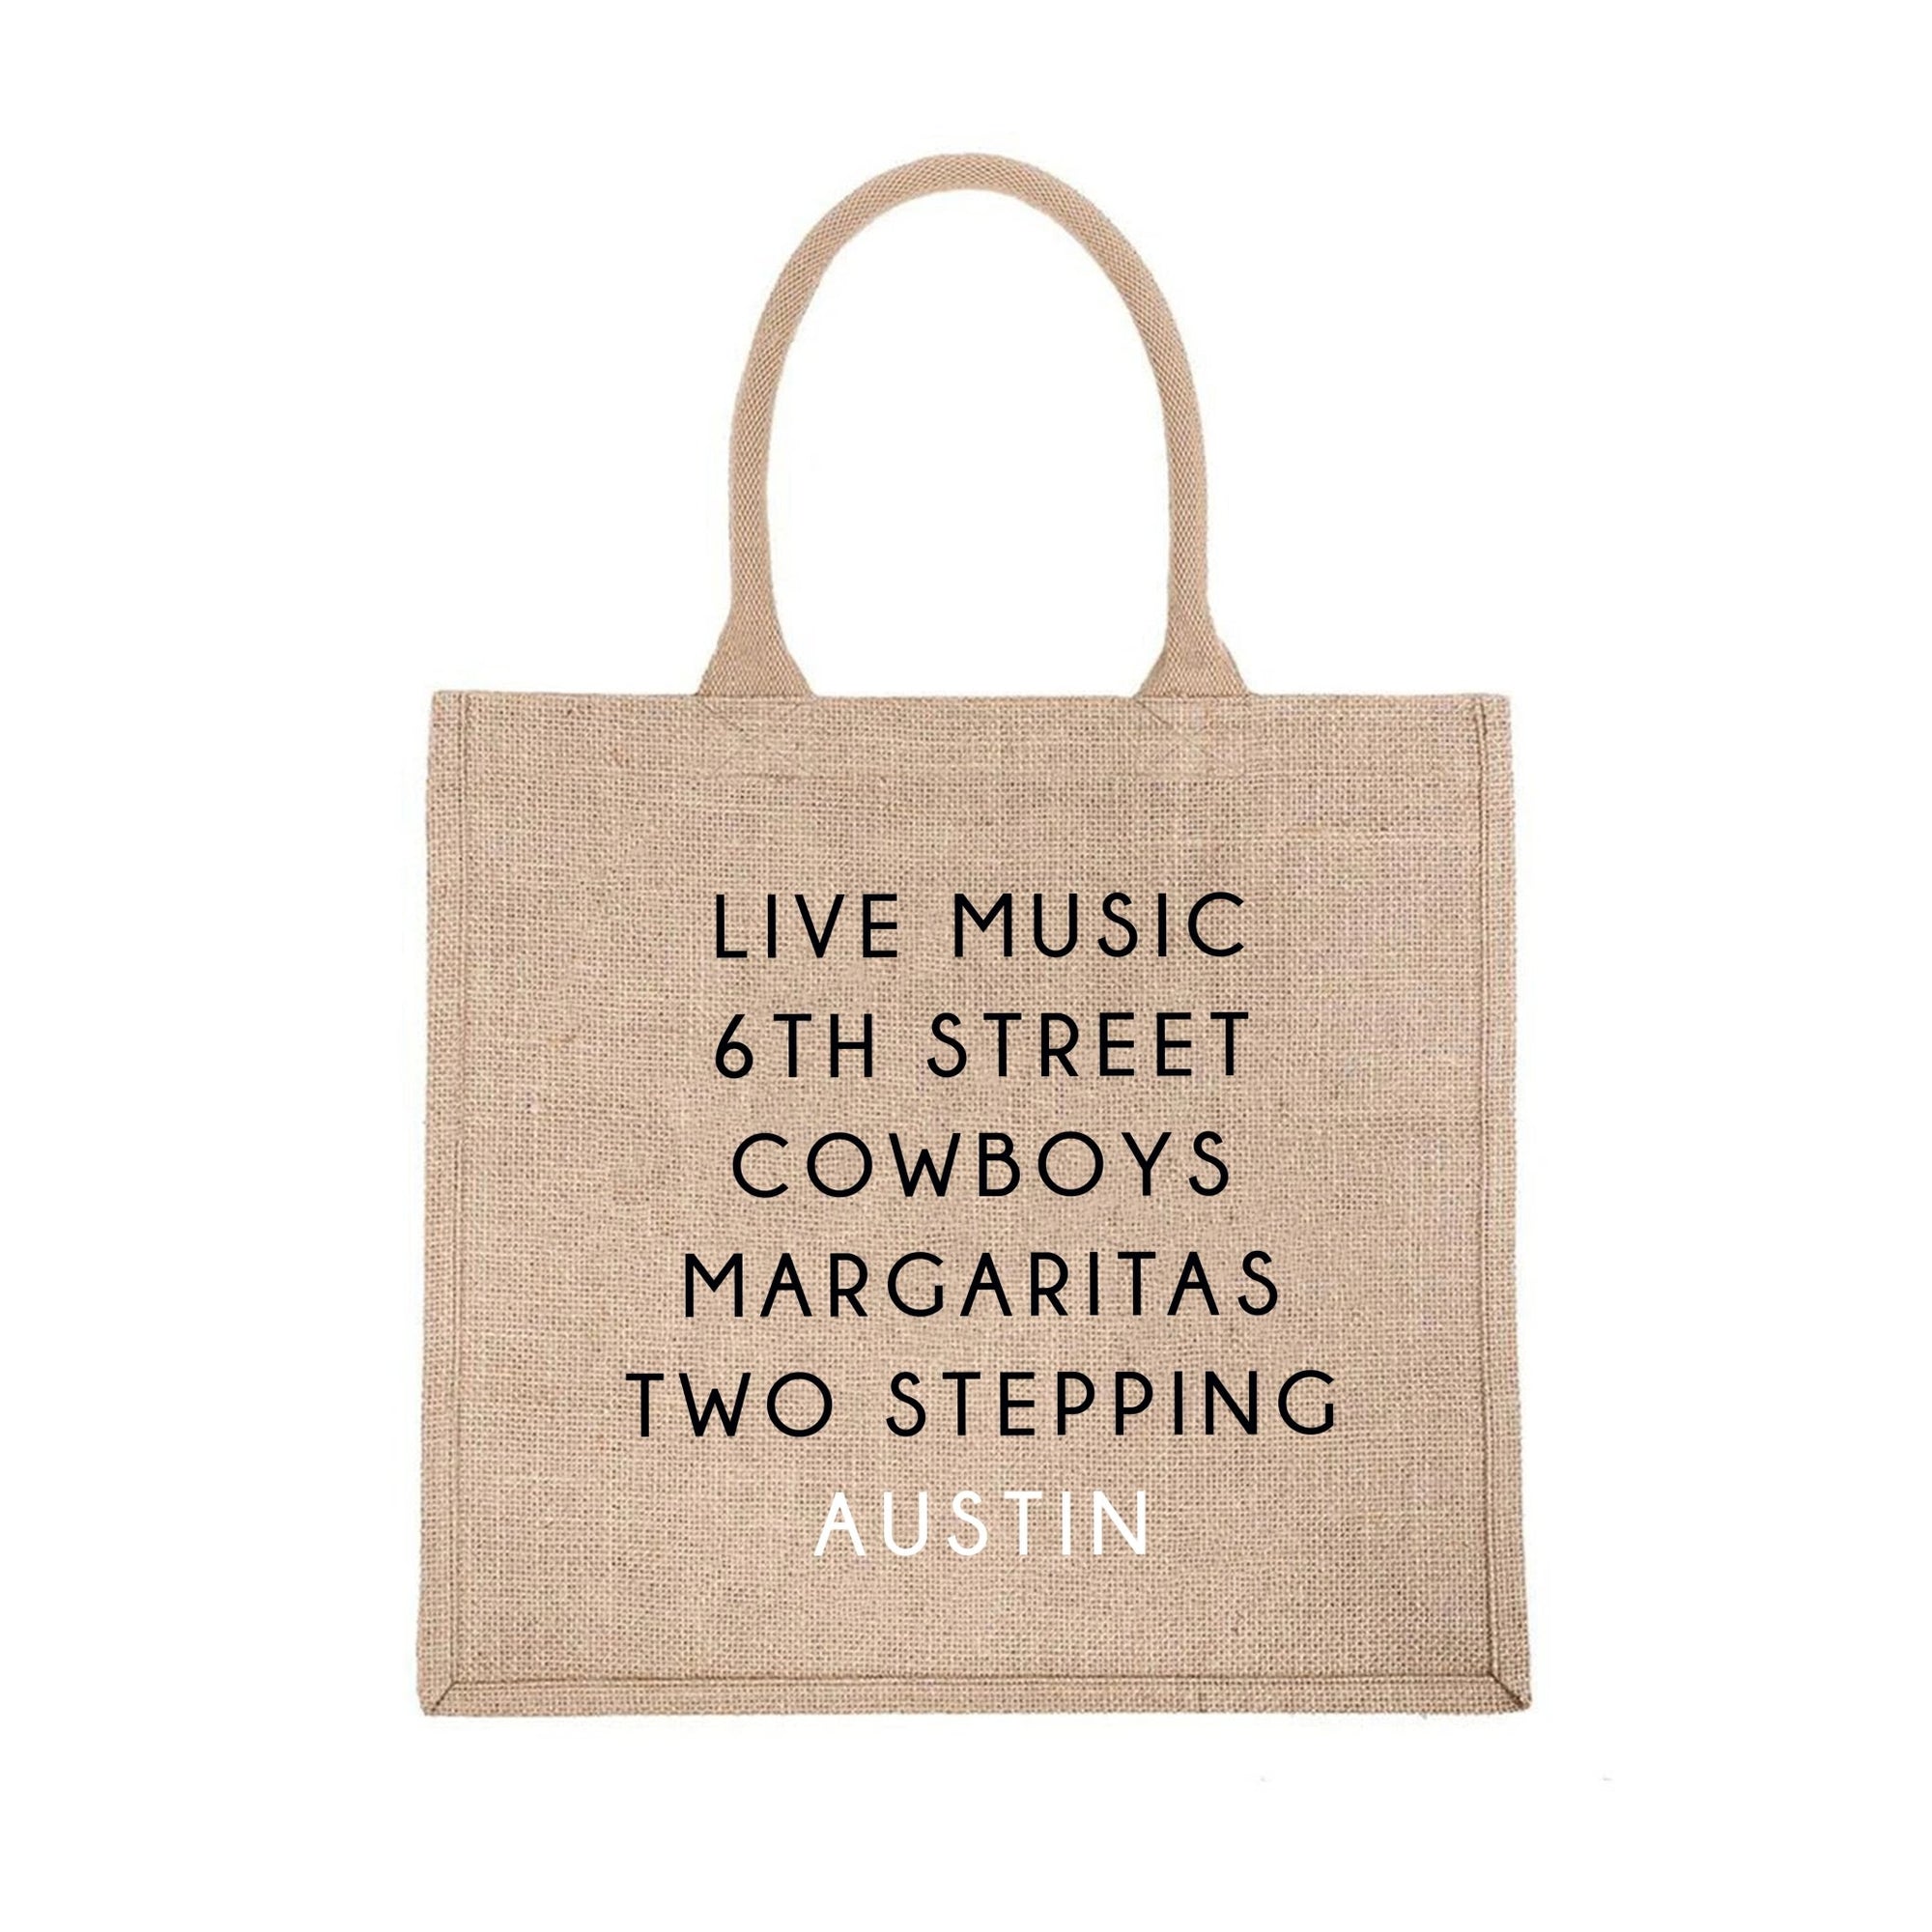 A jute carryall tote customized with sayings about Austin